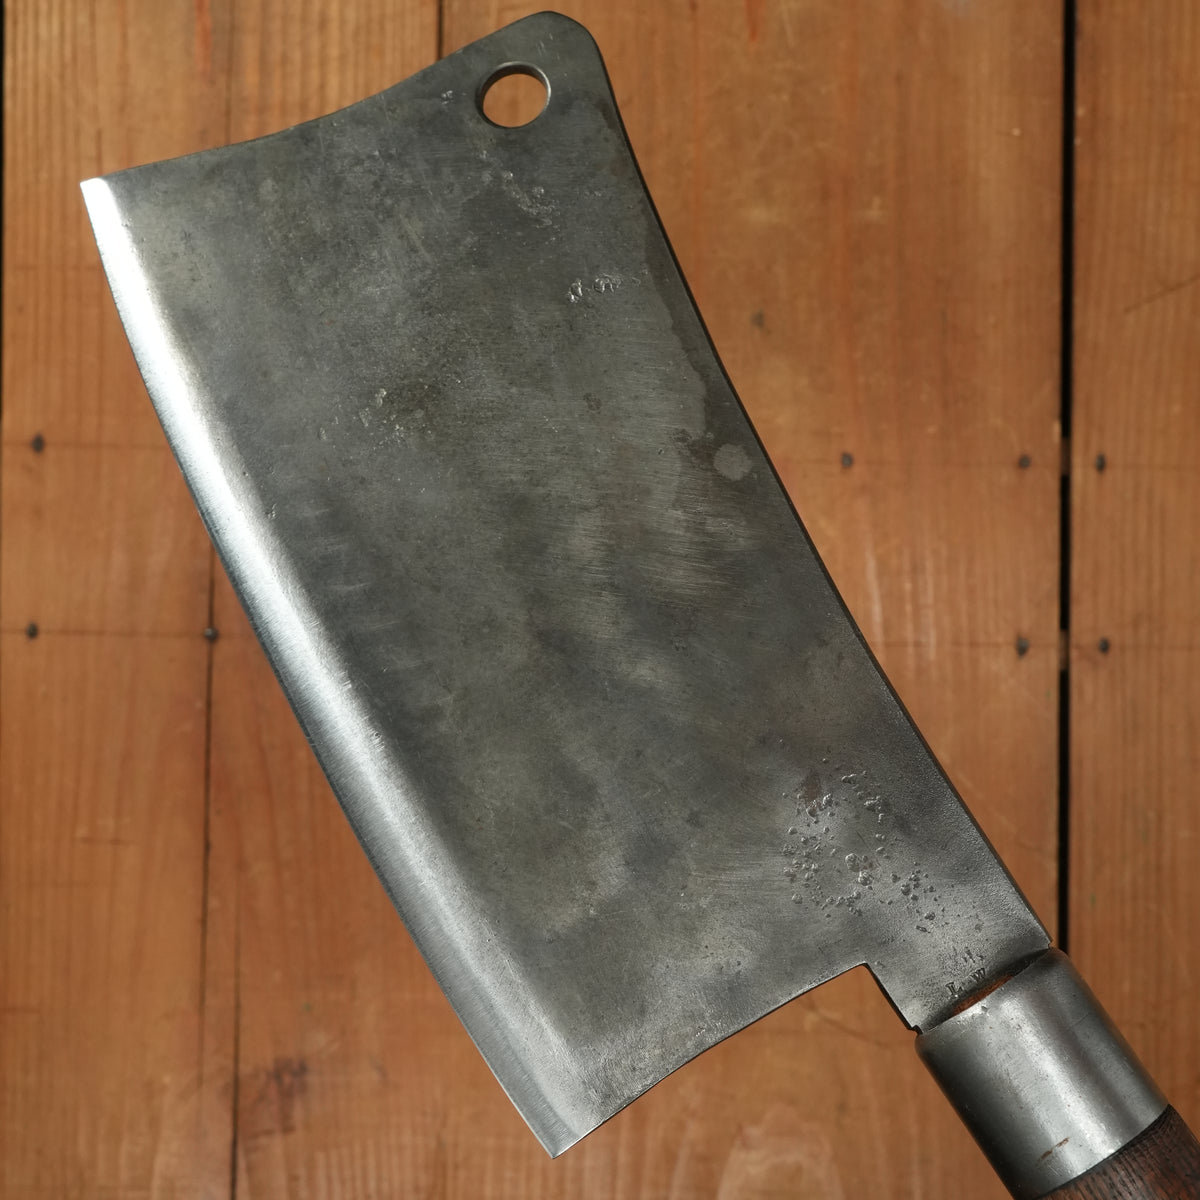 L W 8.75" Cleaver / Splitter Hand Forged Carbon Steel Turned Handle USA? France? Late 1800s-1900s